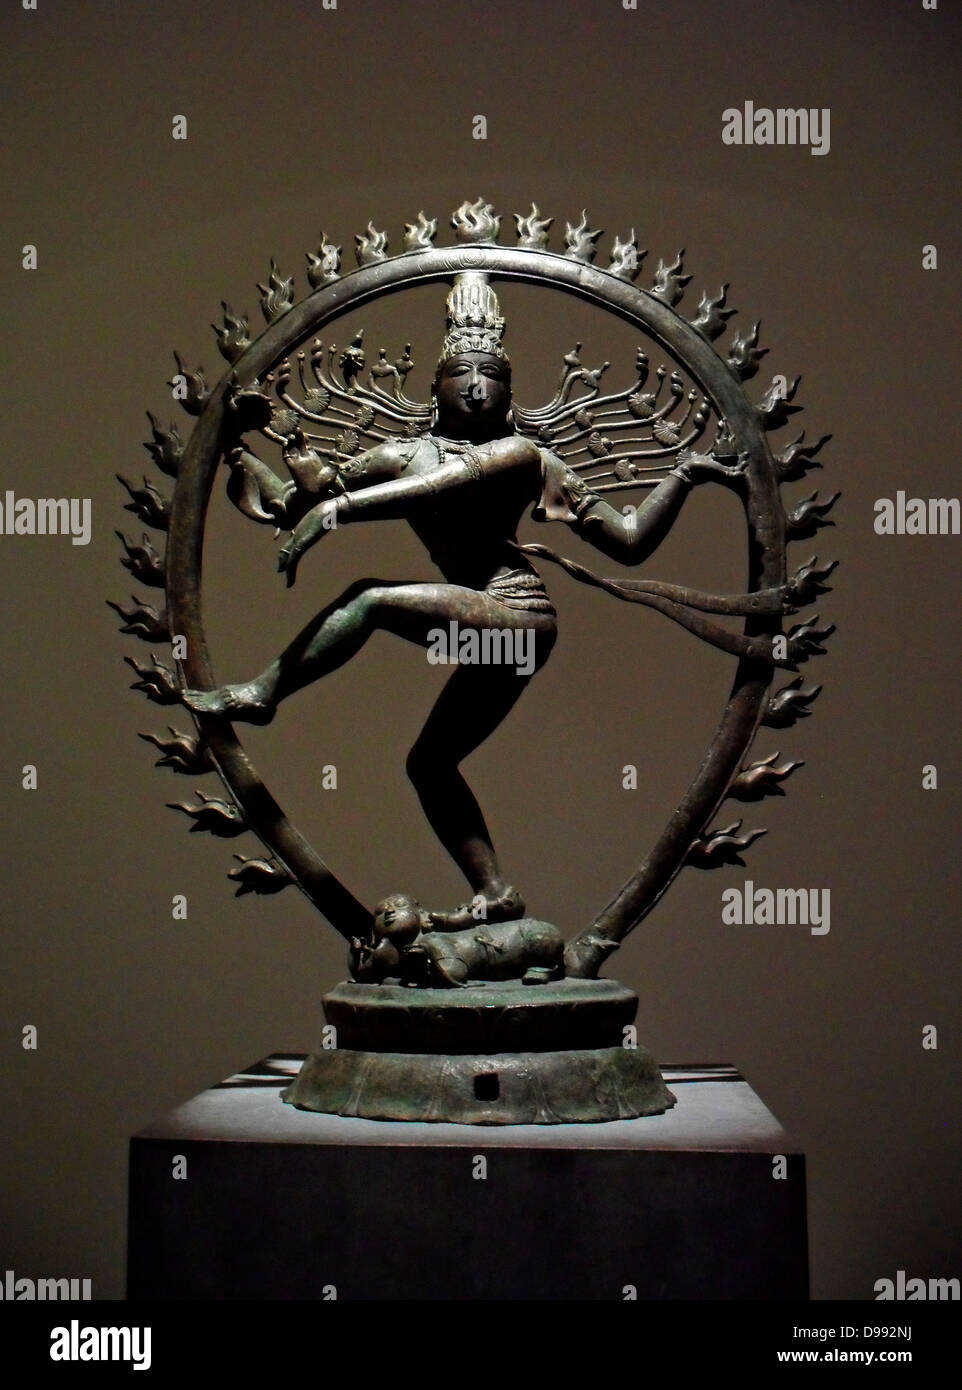 Siva Natarâja, 'King of the dance' 11th century, Chola dynasty (850-1100 A.D)Technic/Material : bronze, sculpture from Tamil Nadu India Stock Photo